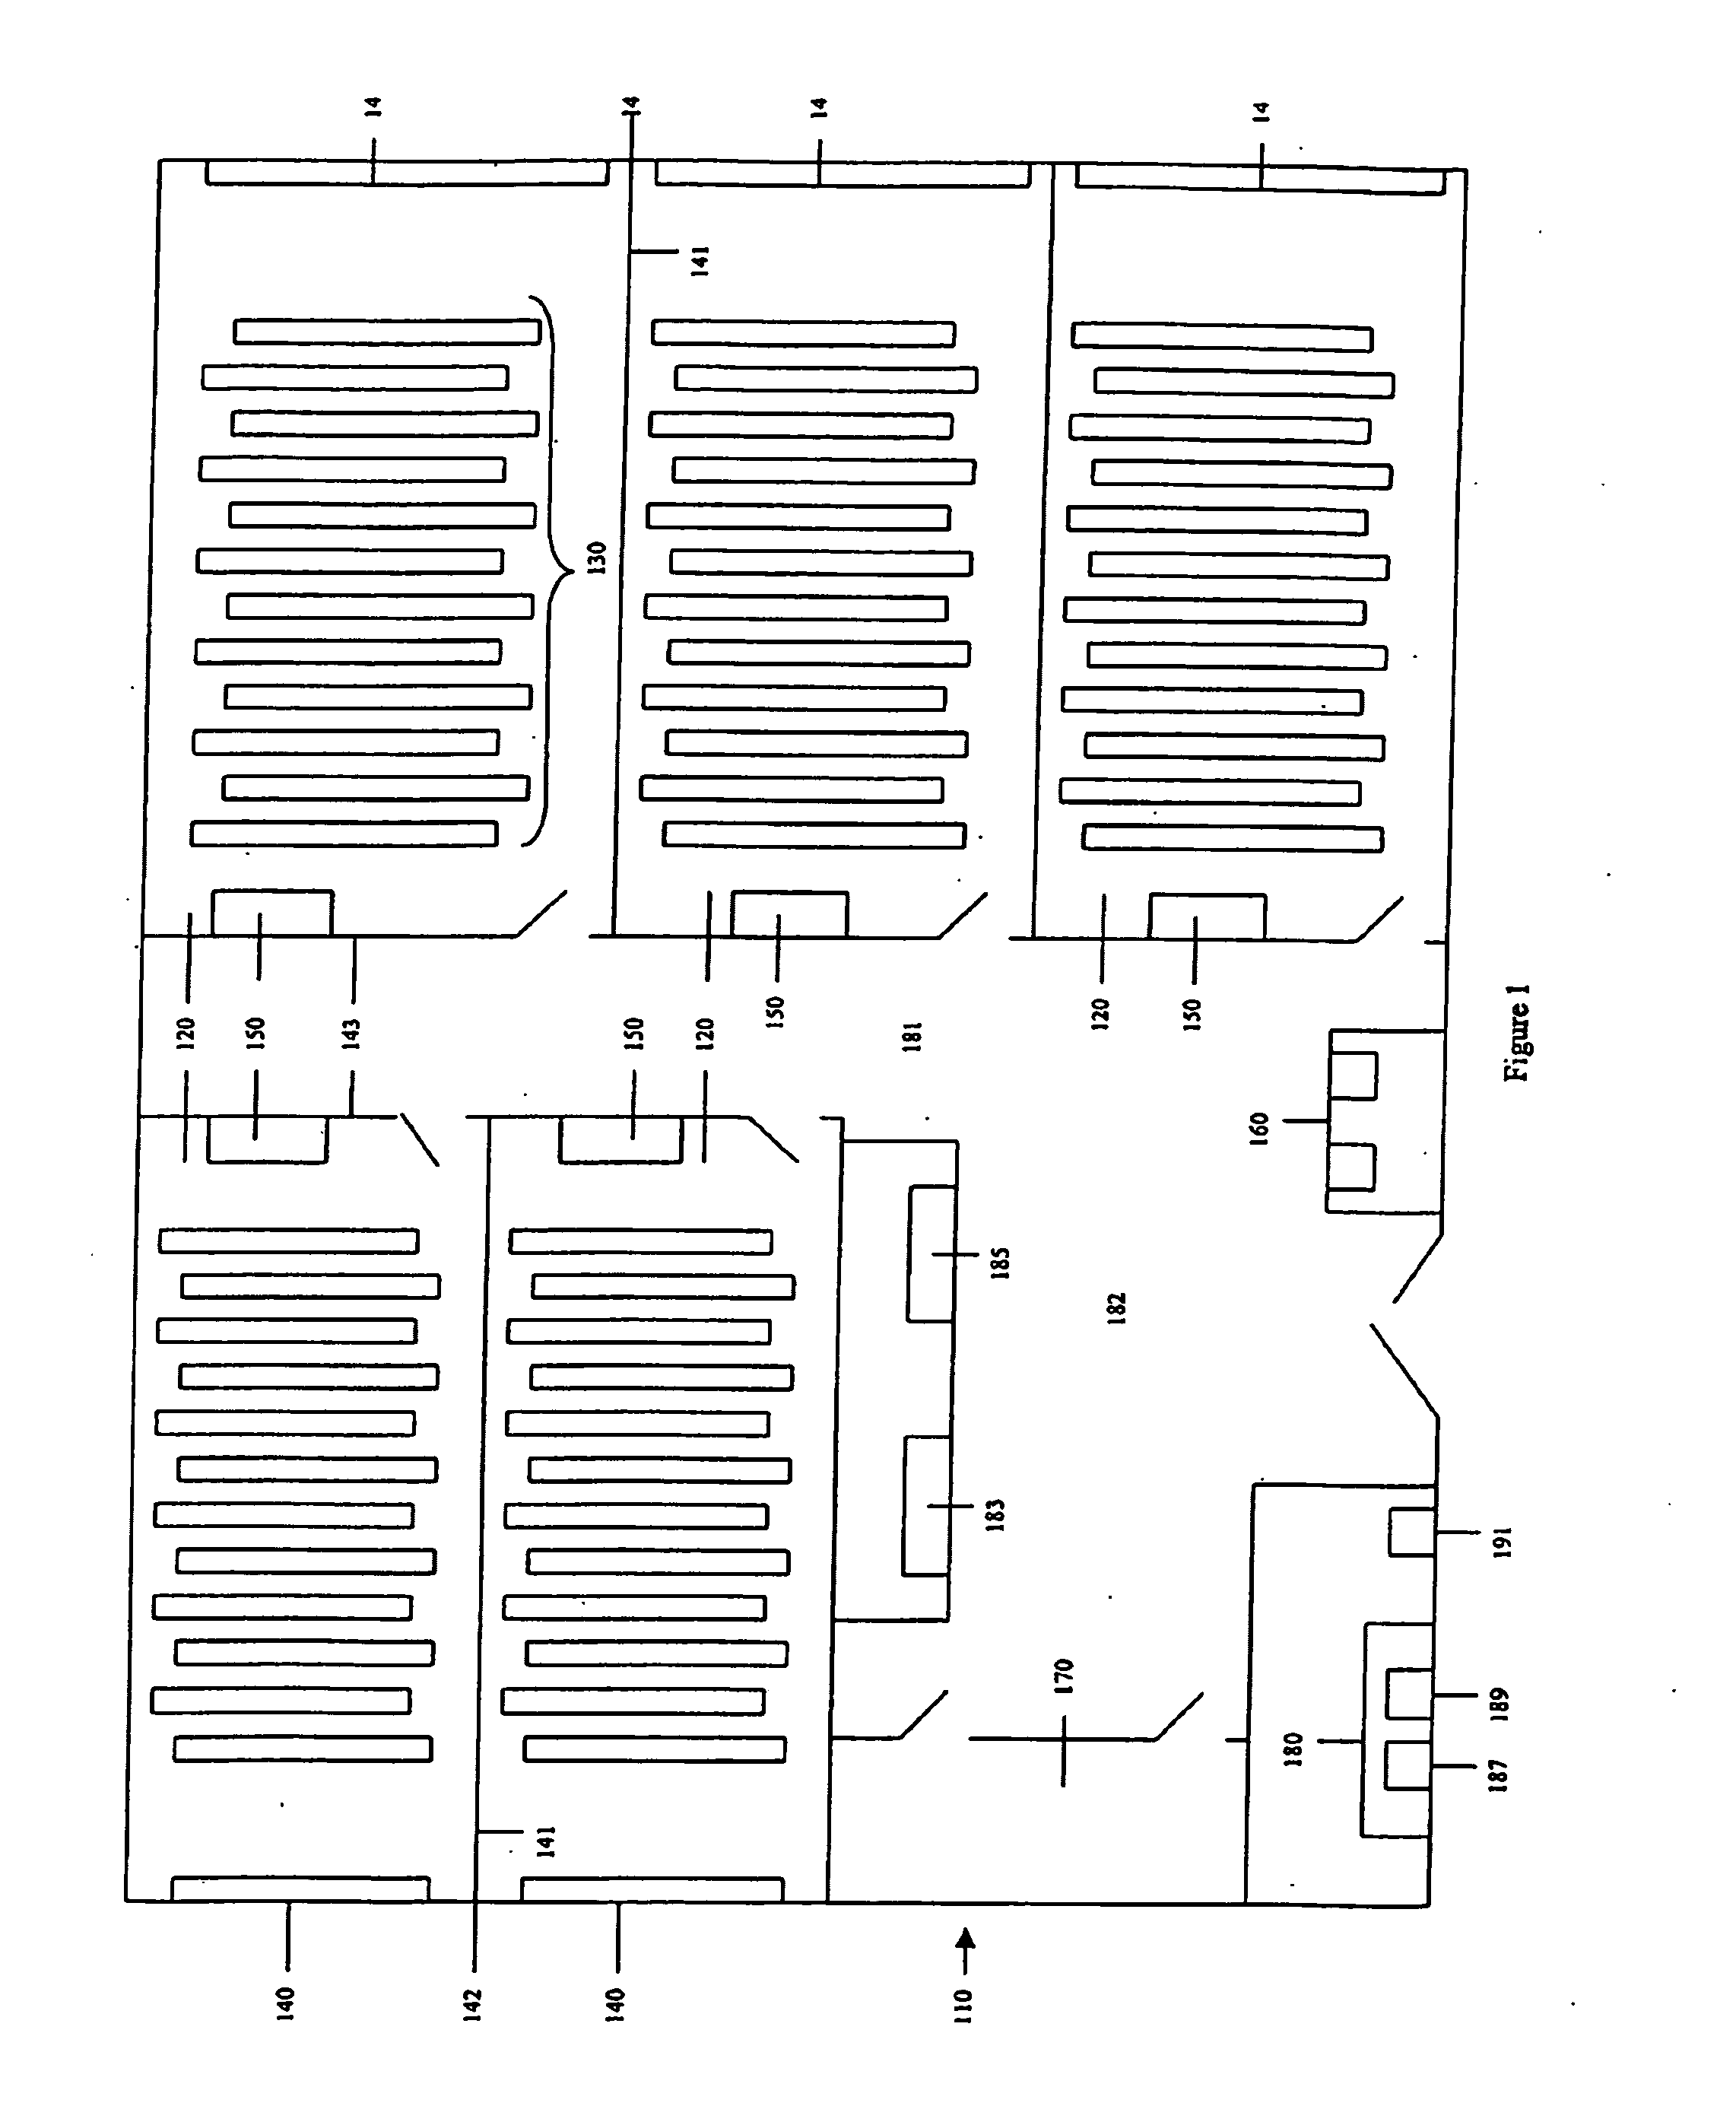 Method and system for providing an environment for the delivery of interactive gaming services